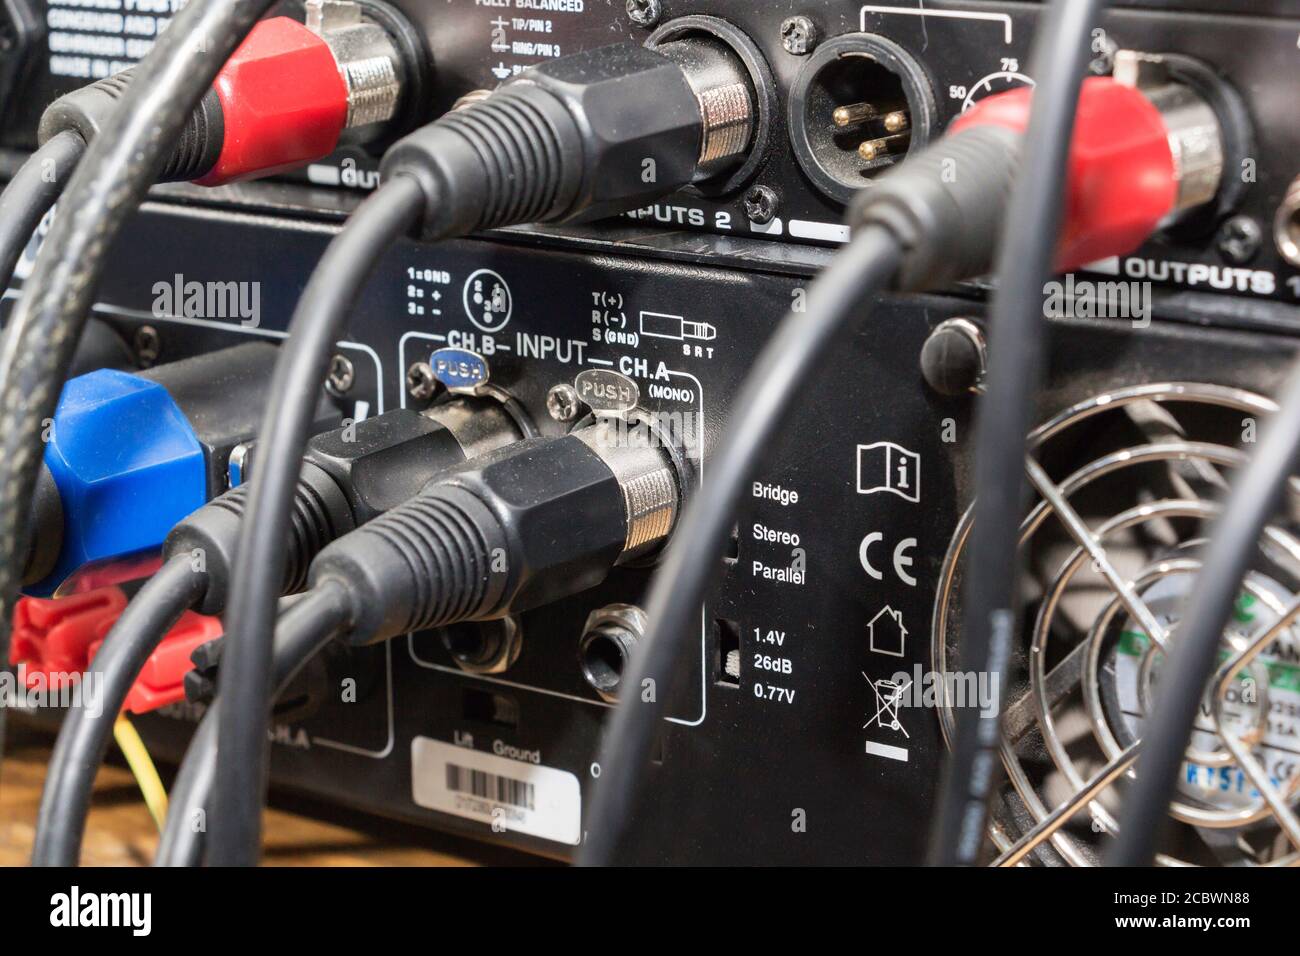 audio jack and wires connected to audio mixer, music dj equipment at concert, festival, bar. Stock Photo